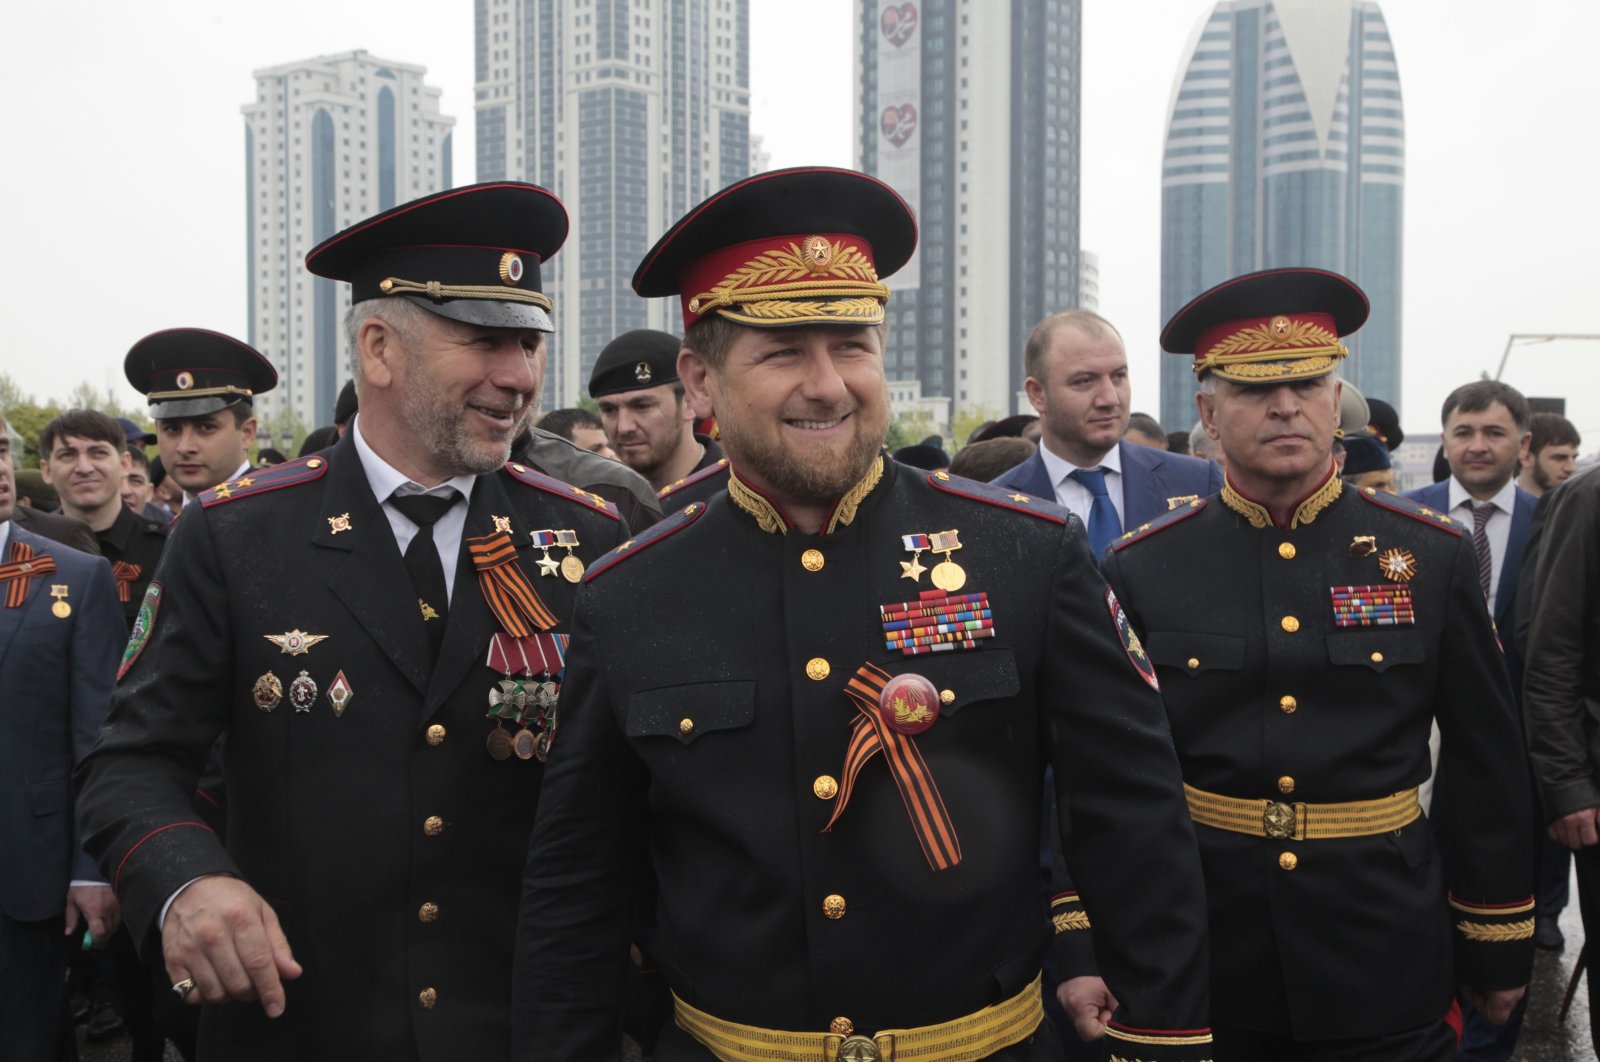 Chechen regional leader Ramzan Kadyrov (C), wearing a Russian military uniform, attends celebrations marking the 70th anniversary of the victory over Nazi Germany, in Chechnya's provincial capital Grozny, Russia, May 9, 2015. (AP Photo)